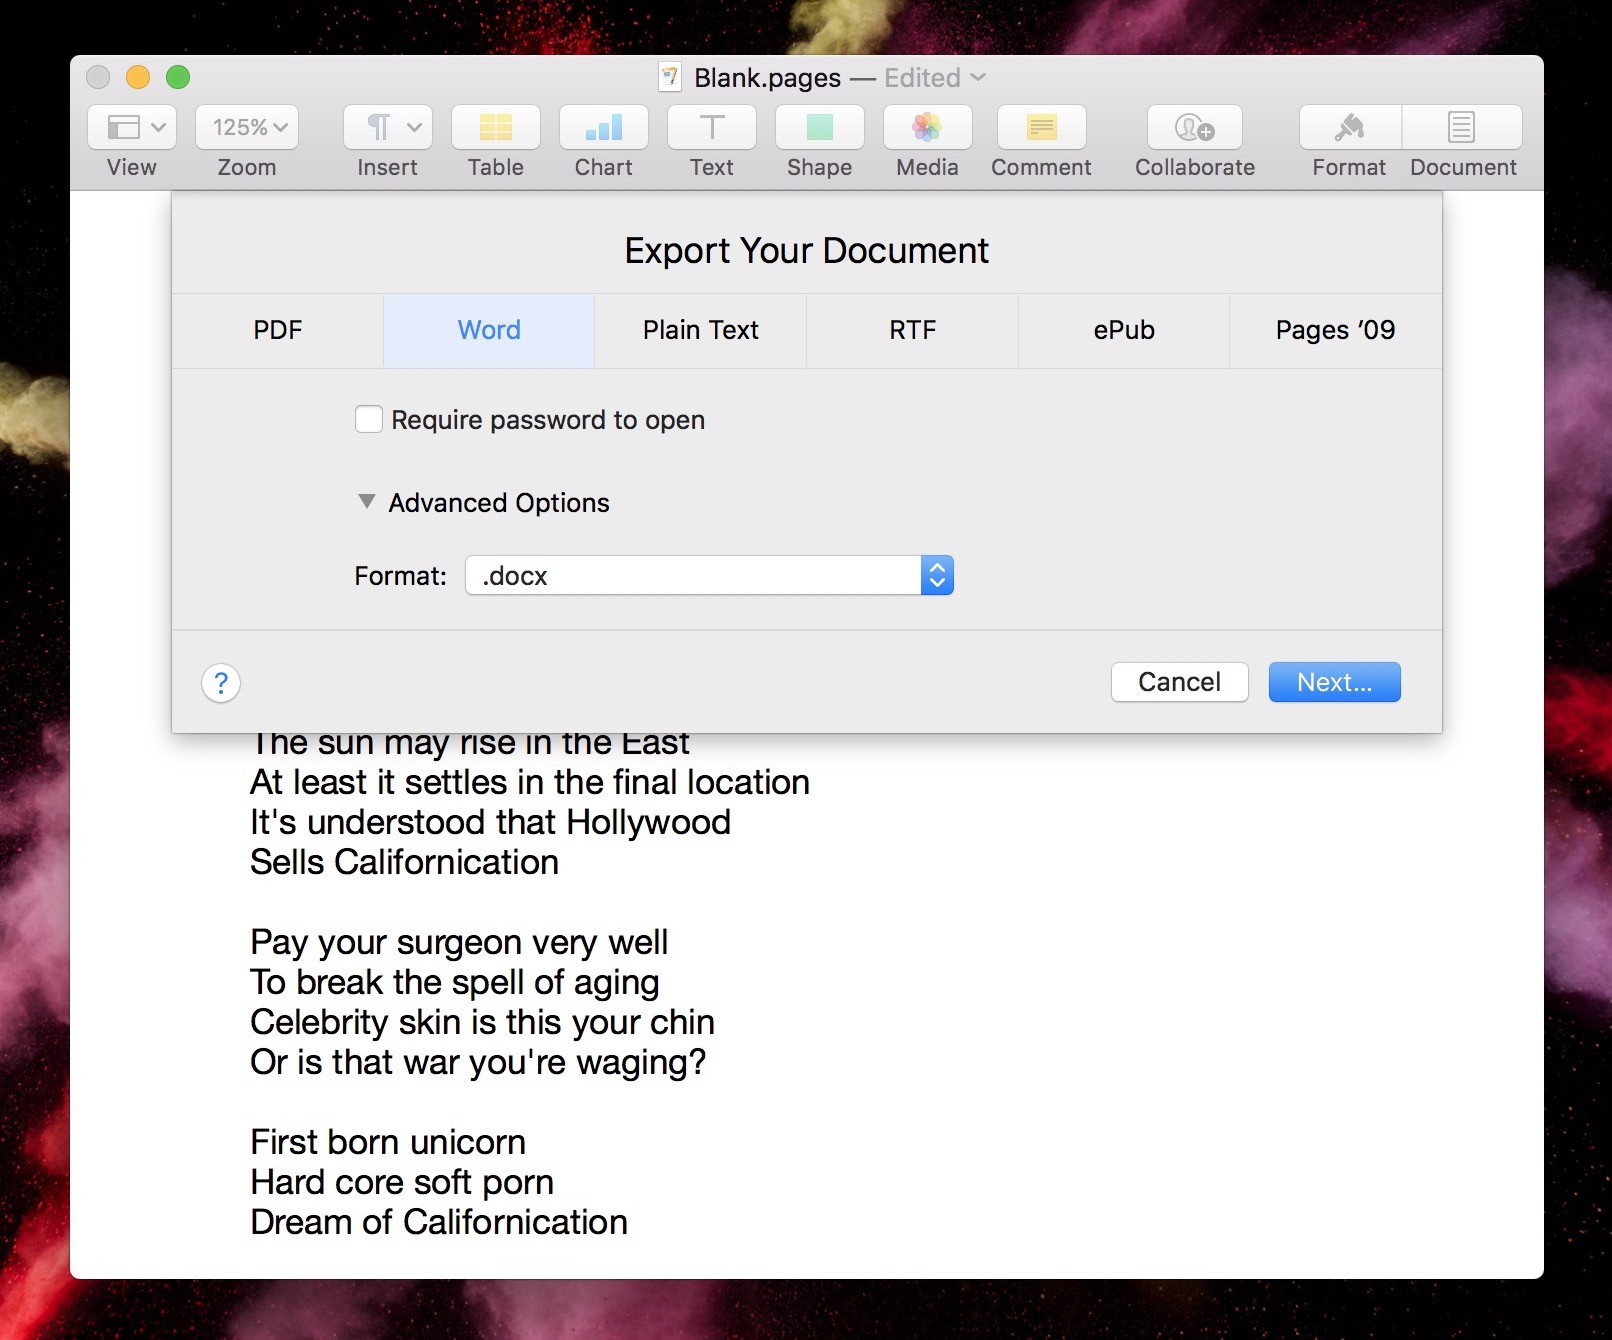 How to save a Pages document as a Word document